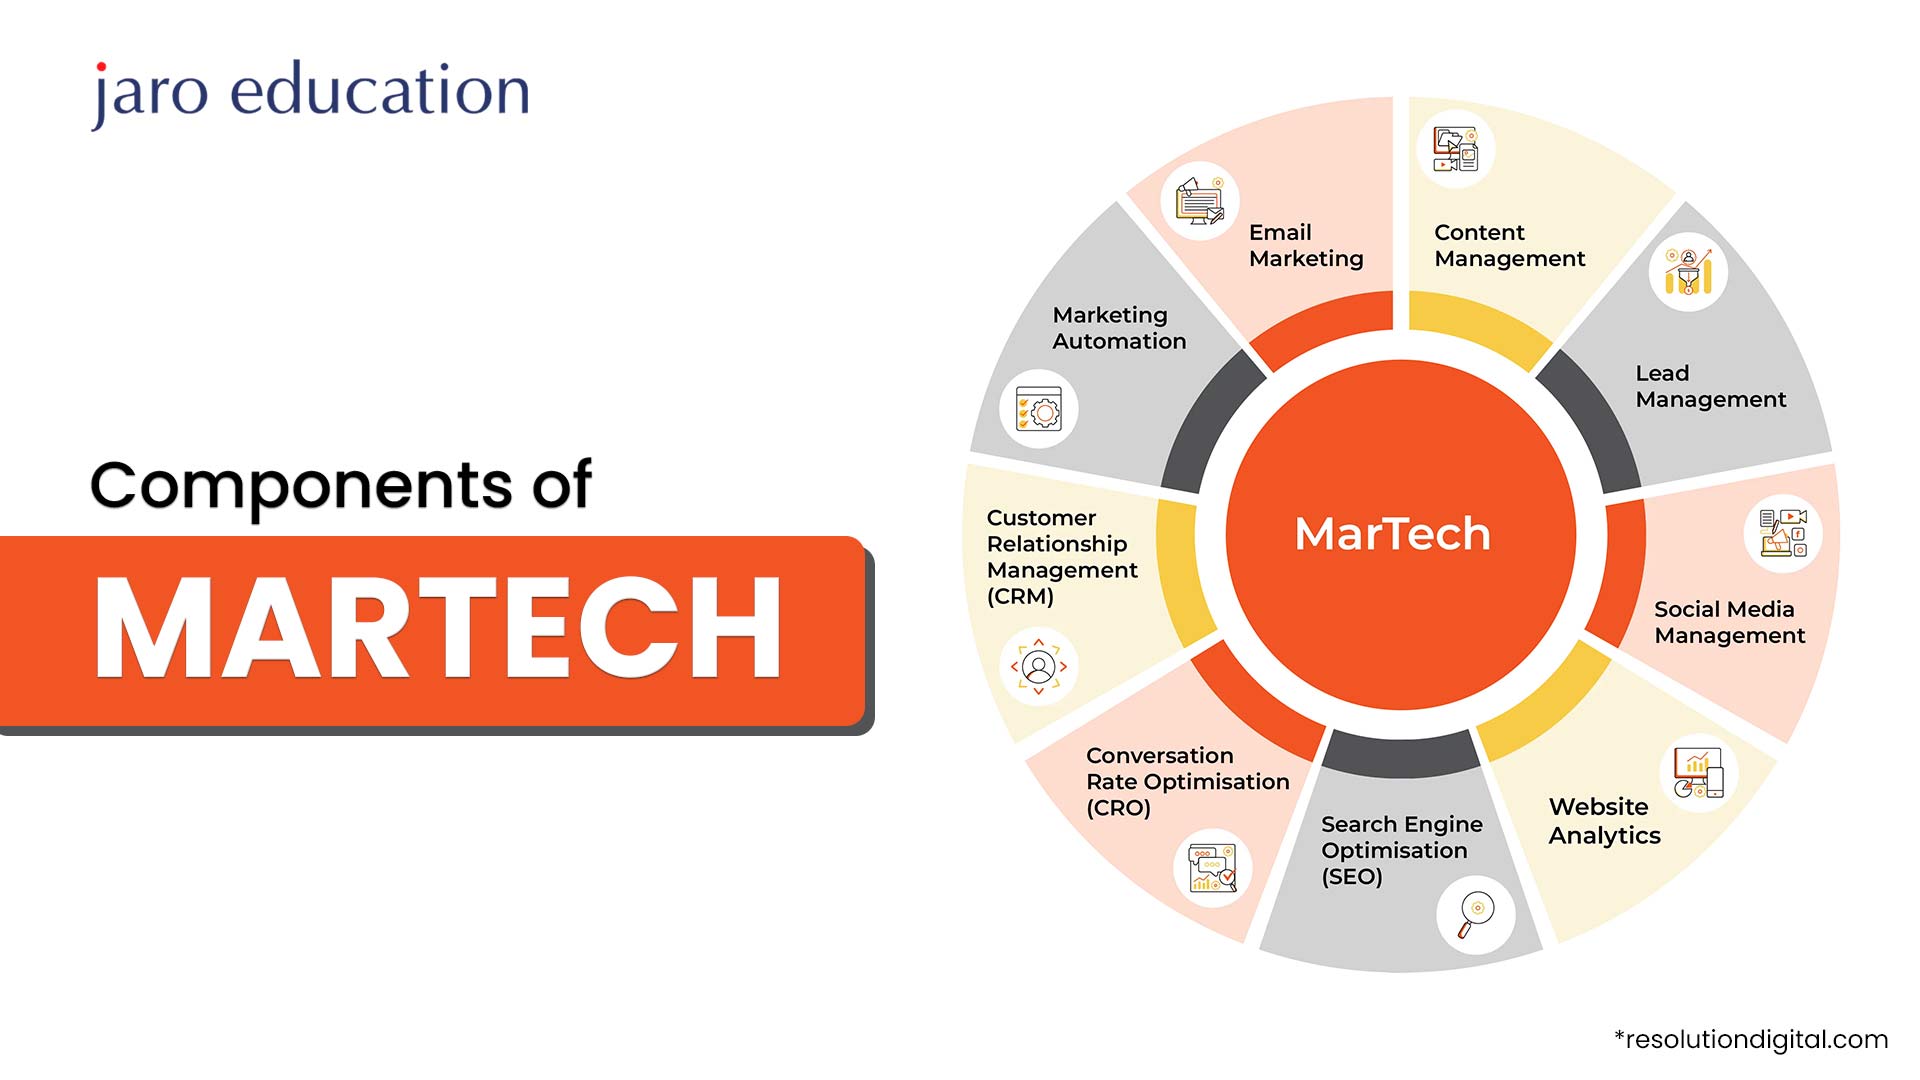 Components of Martech